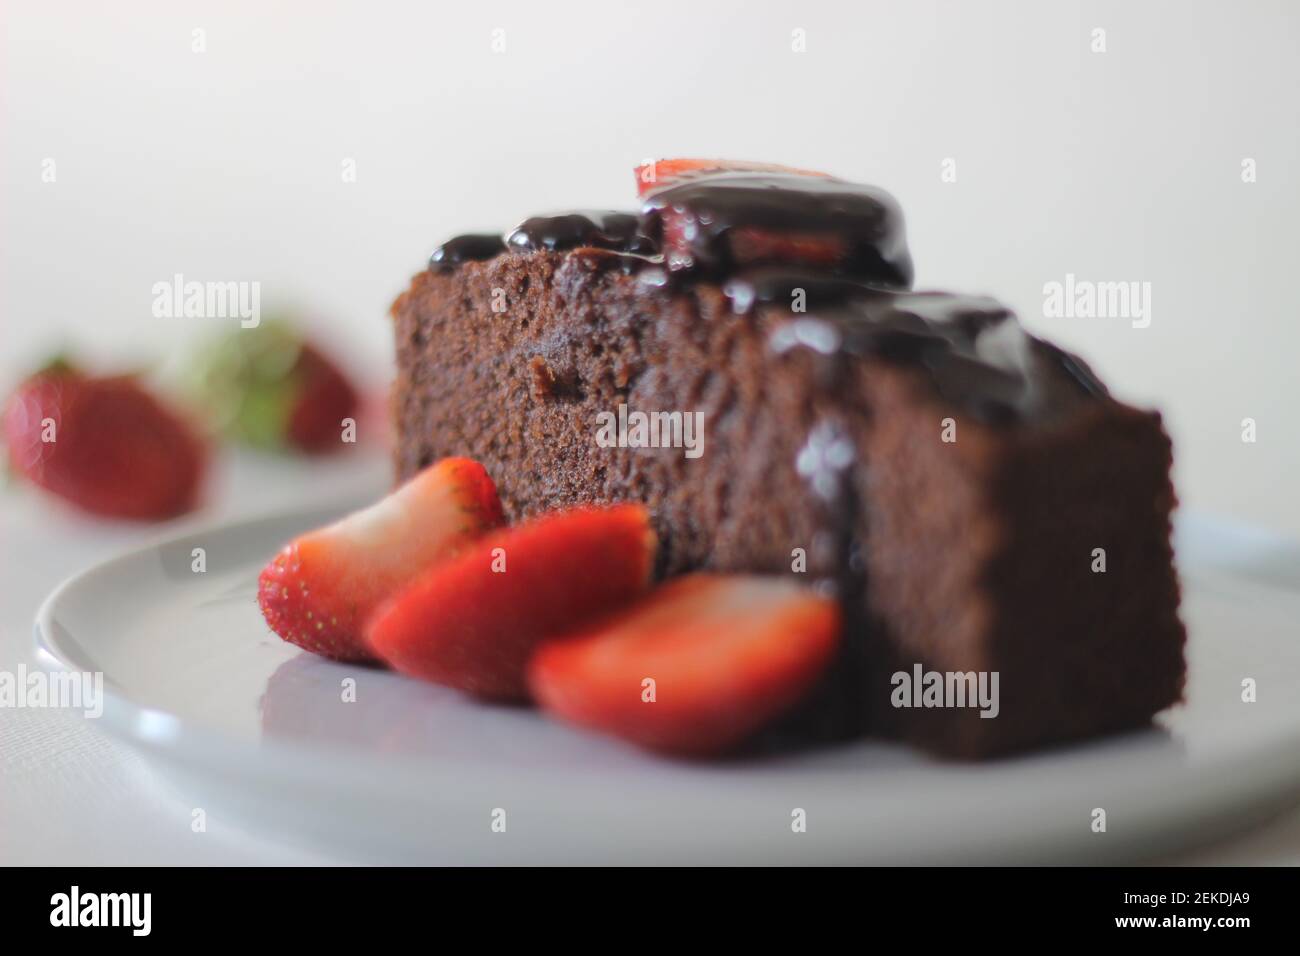 Finger millet chocalate cake. A Healthy Homemade Chocolate cake made with finger millet flour instead of all purpose flour, decorated with a generous Stock Photo